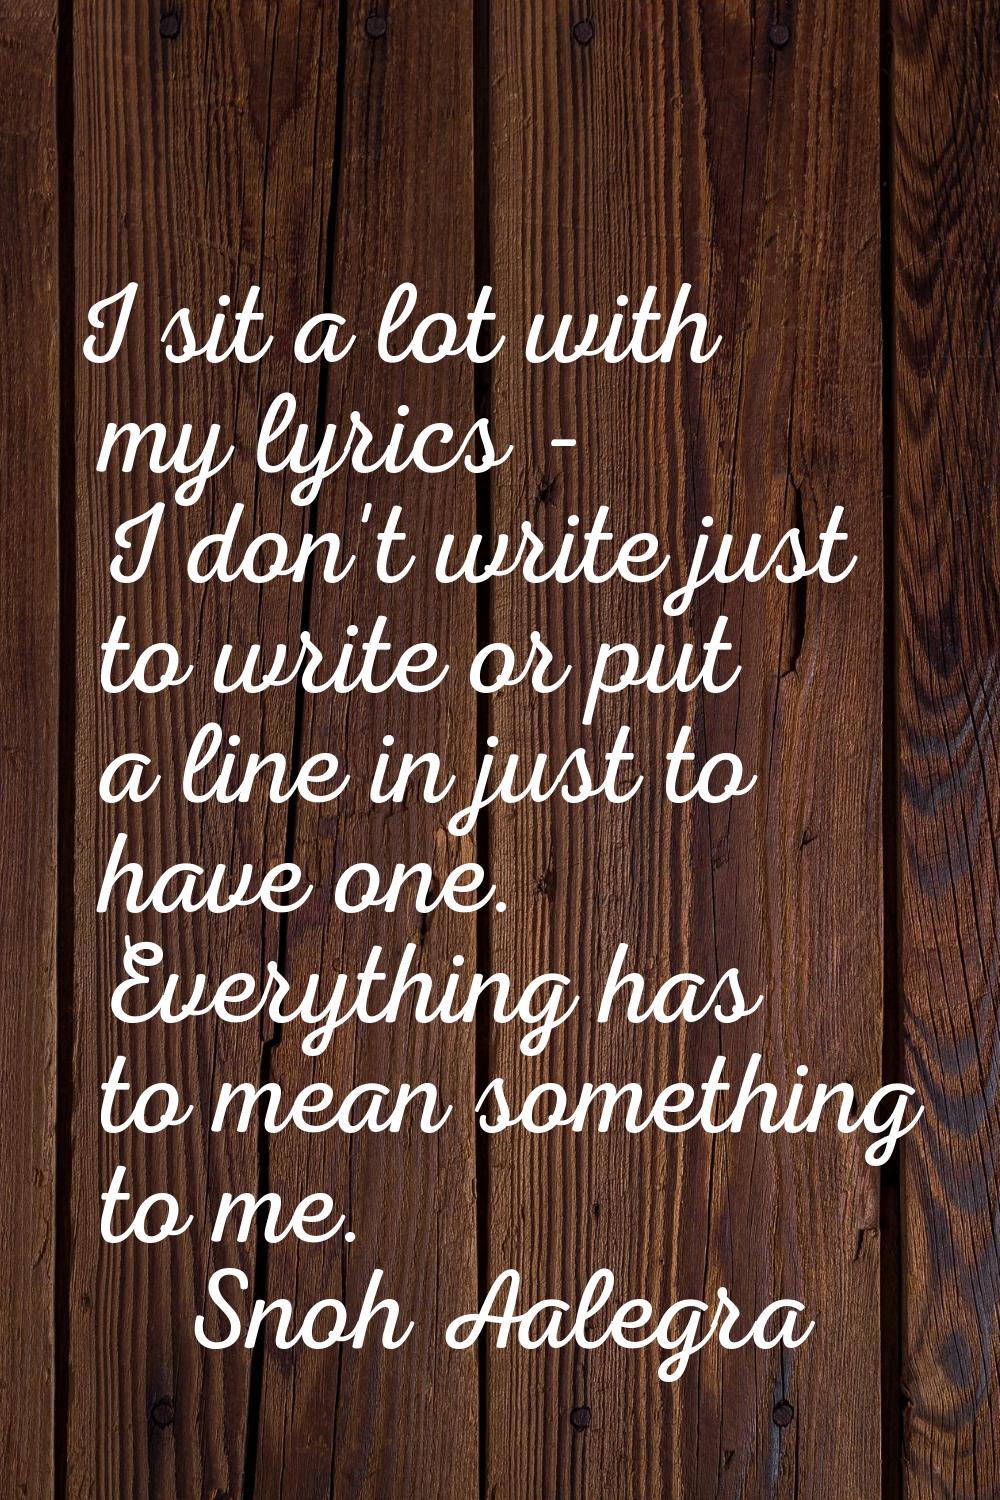 I sit a lot with my lyrics - I don't write just to write or put a line in just to have one. Everyth